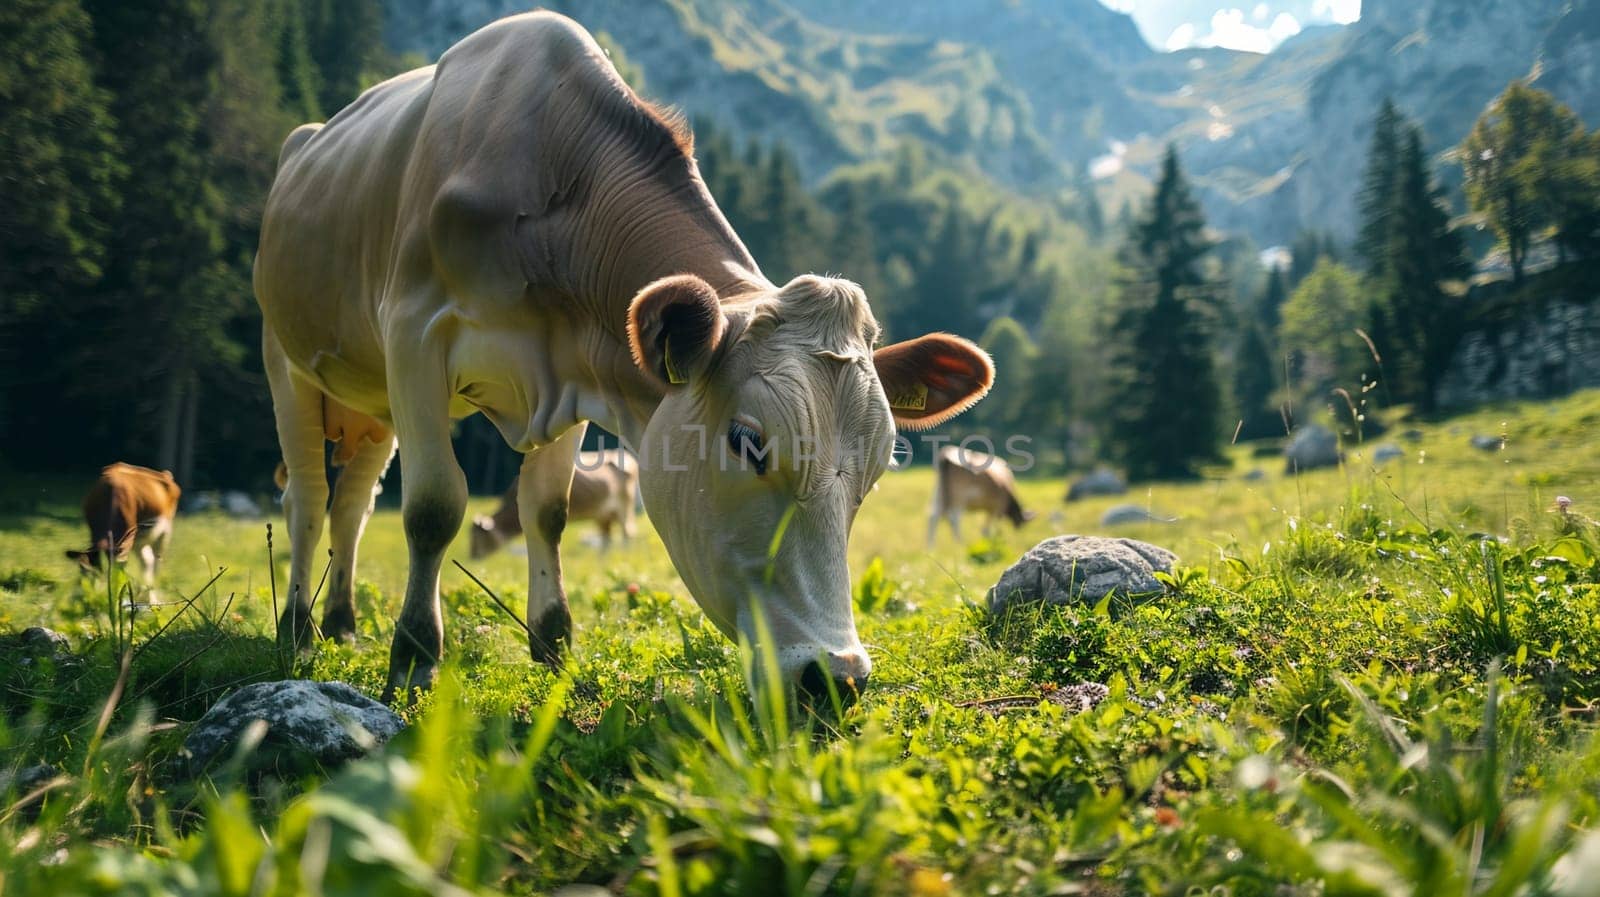 Cattle leisurely grazing on vibrant green Alpine grassland under clear blue sky with distant mountains, serene scenery of nature and livestock by Yevhen89